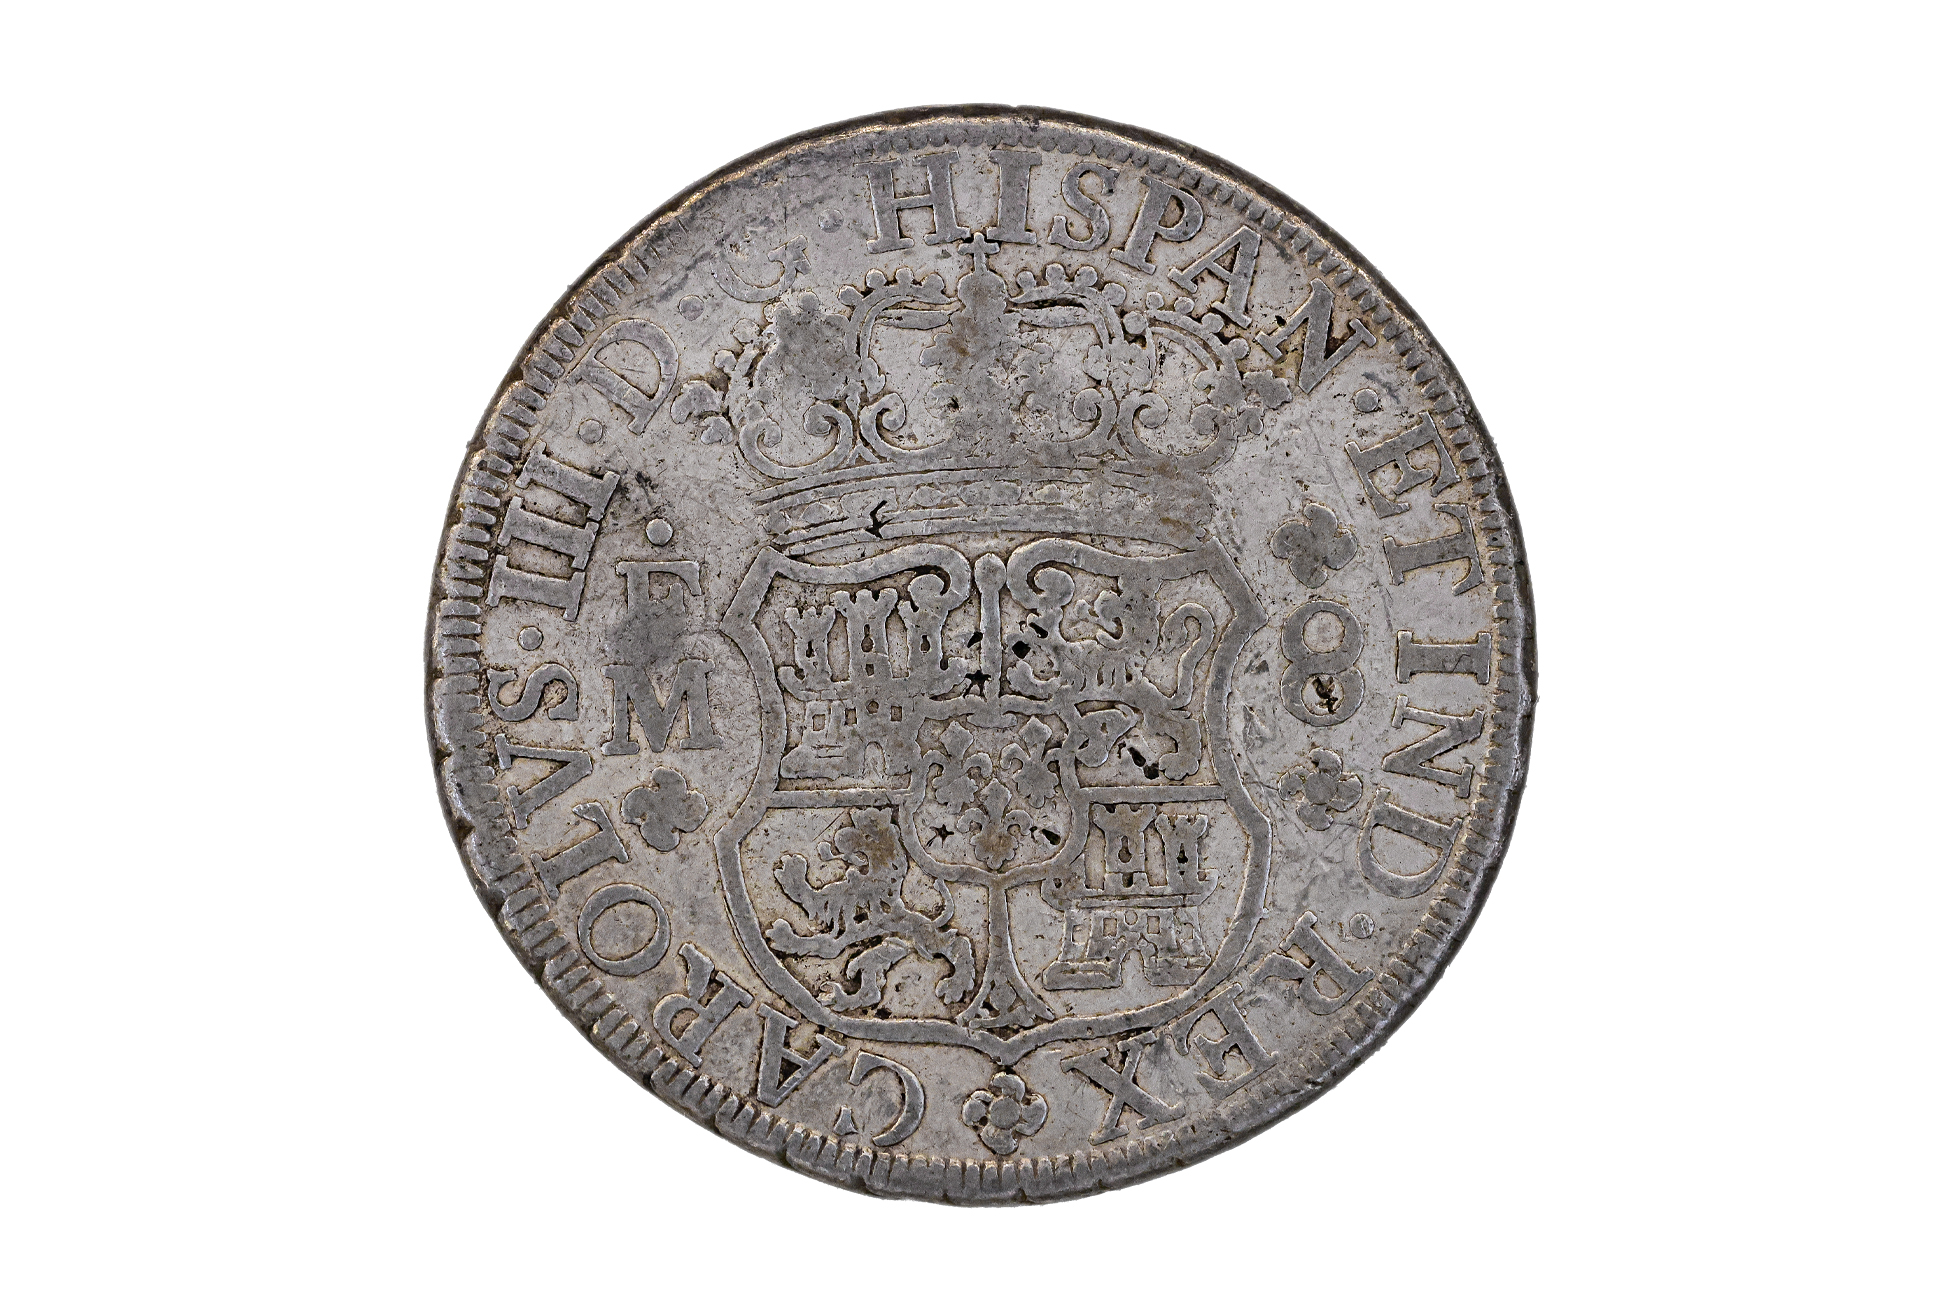 MEXICO 8 REALES PILLAR 1771 CHINESE COUNTERMARKS